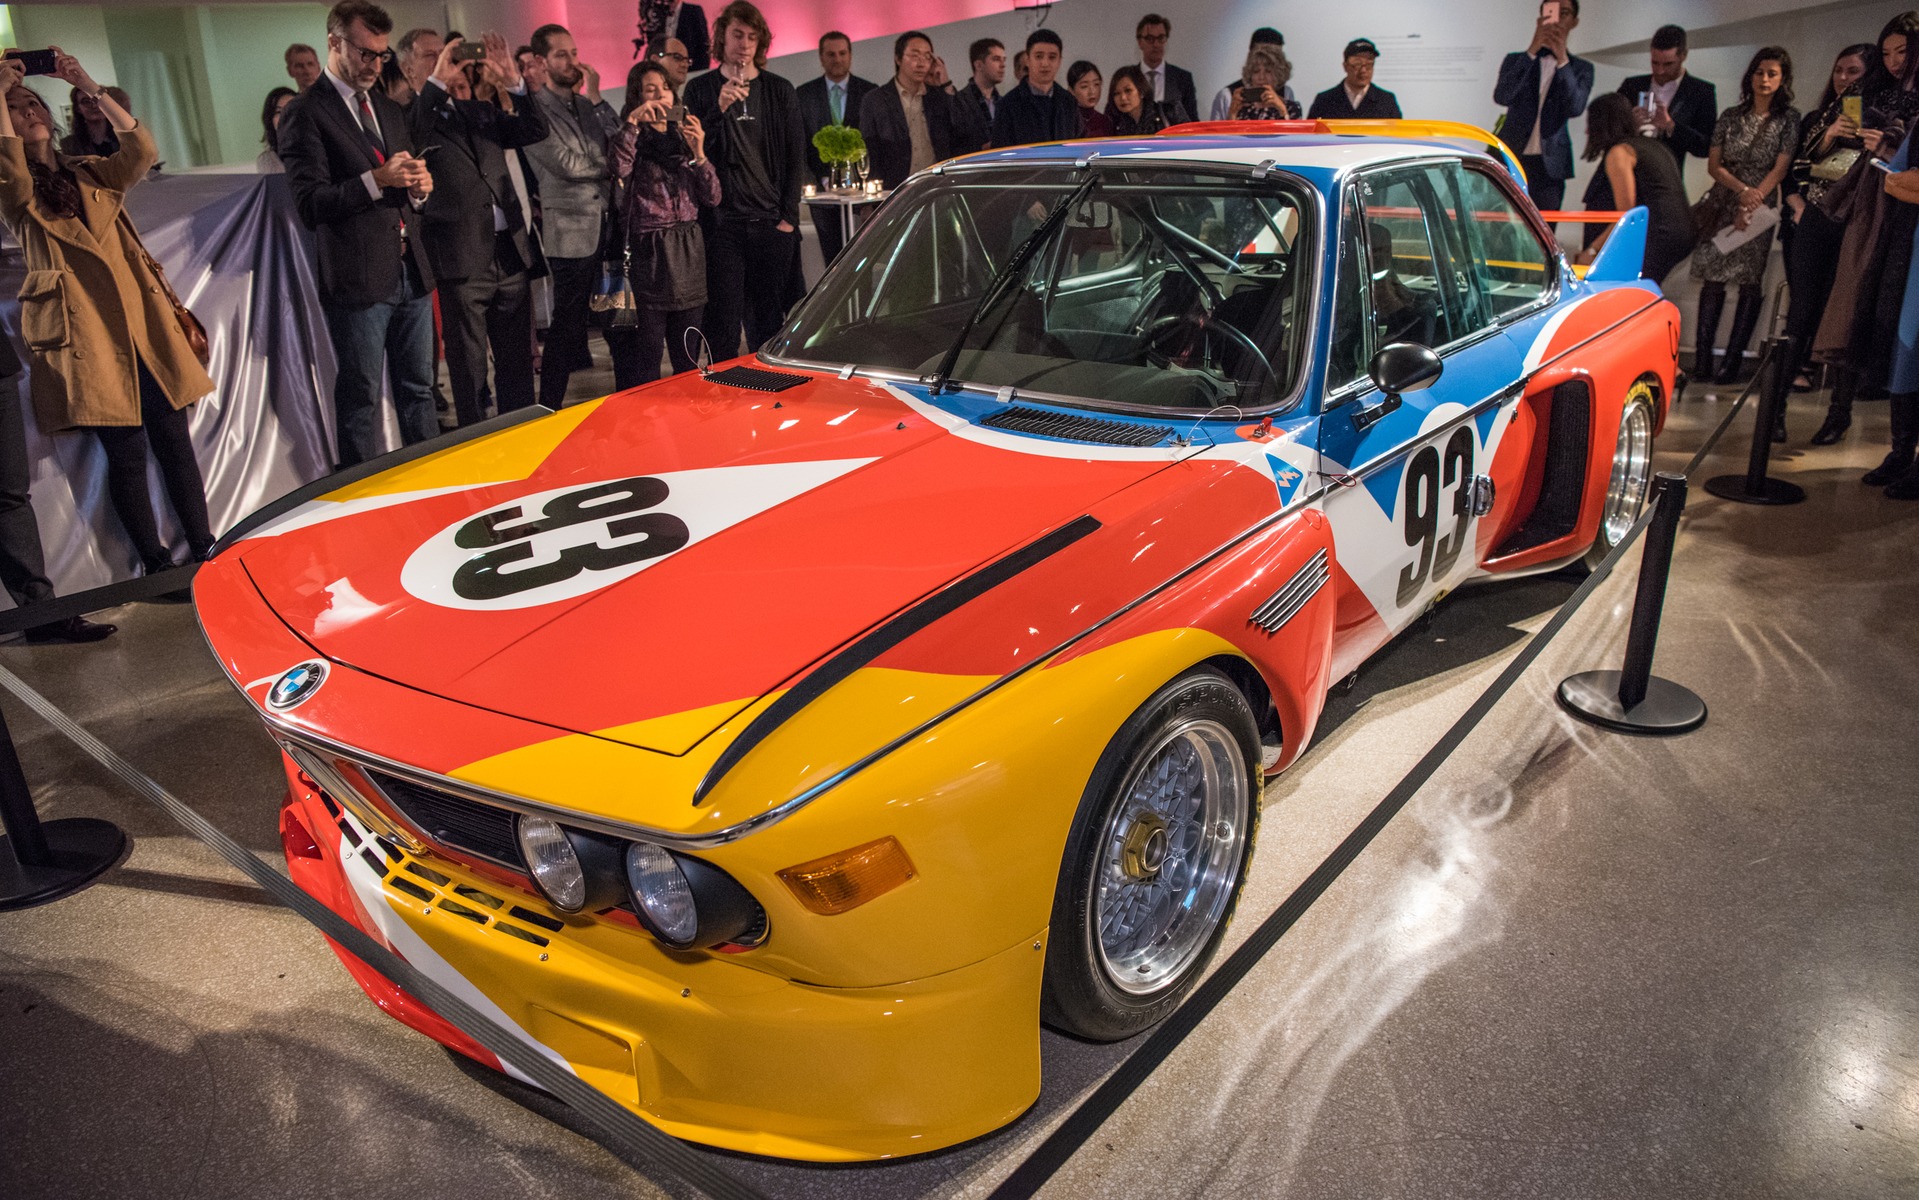 The very first BMW Art Car, the 3.0 CSL